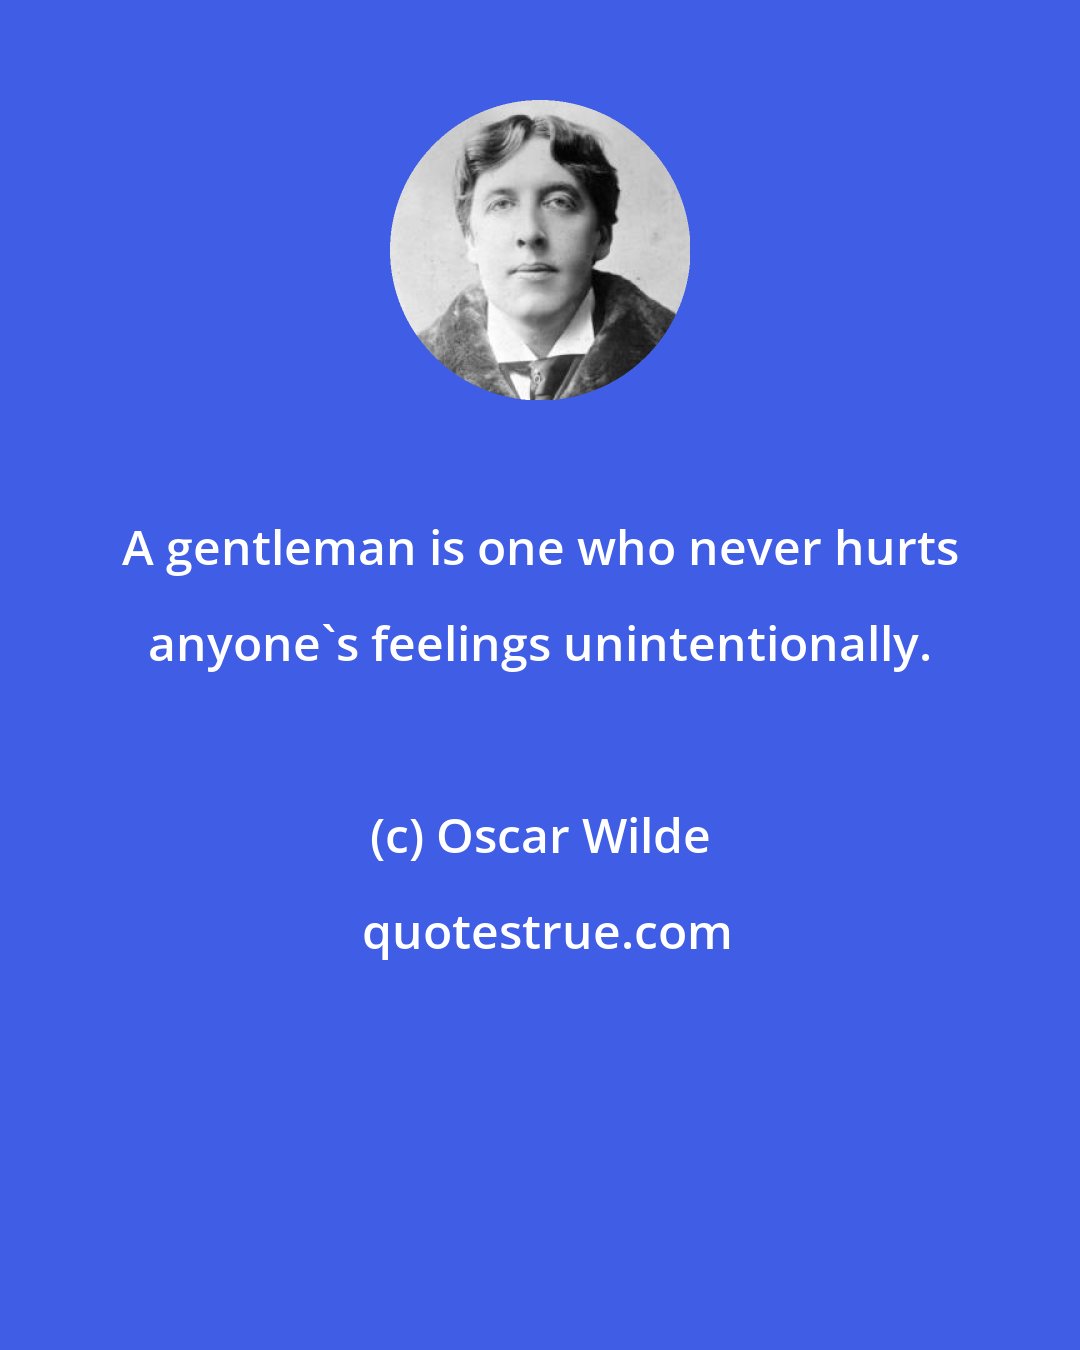 Oscar Wilde: A gentleman is one who never hurts anyone's feelings unintentionally.